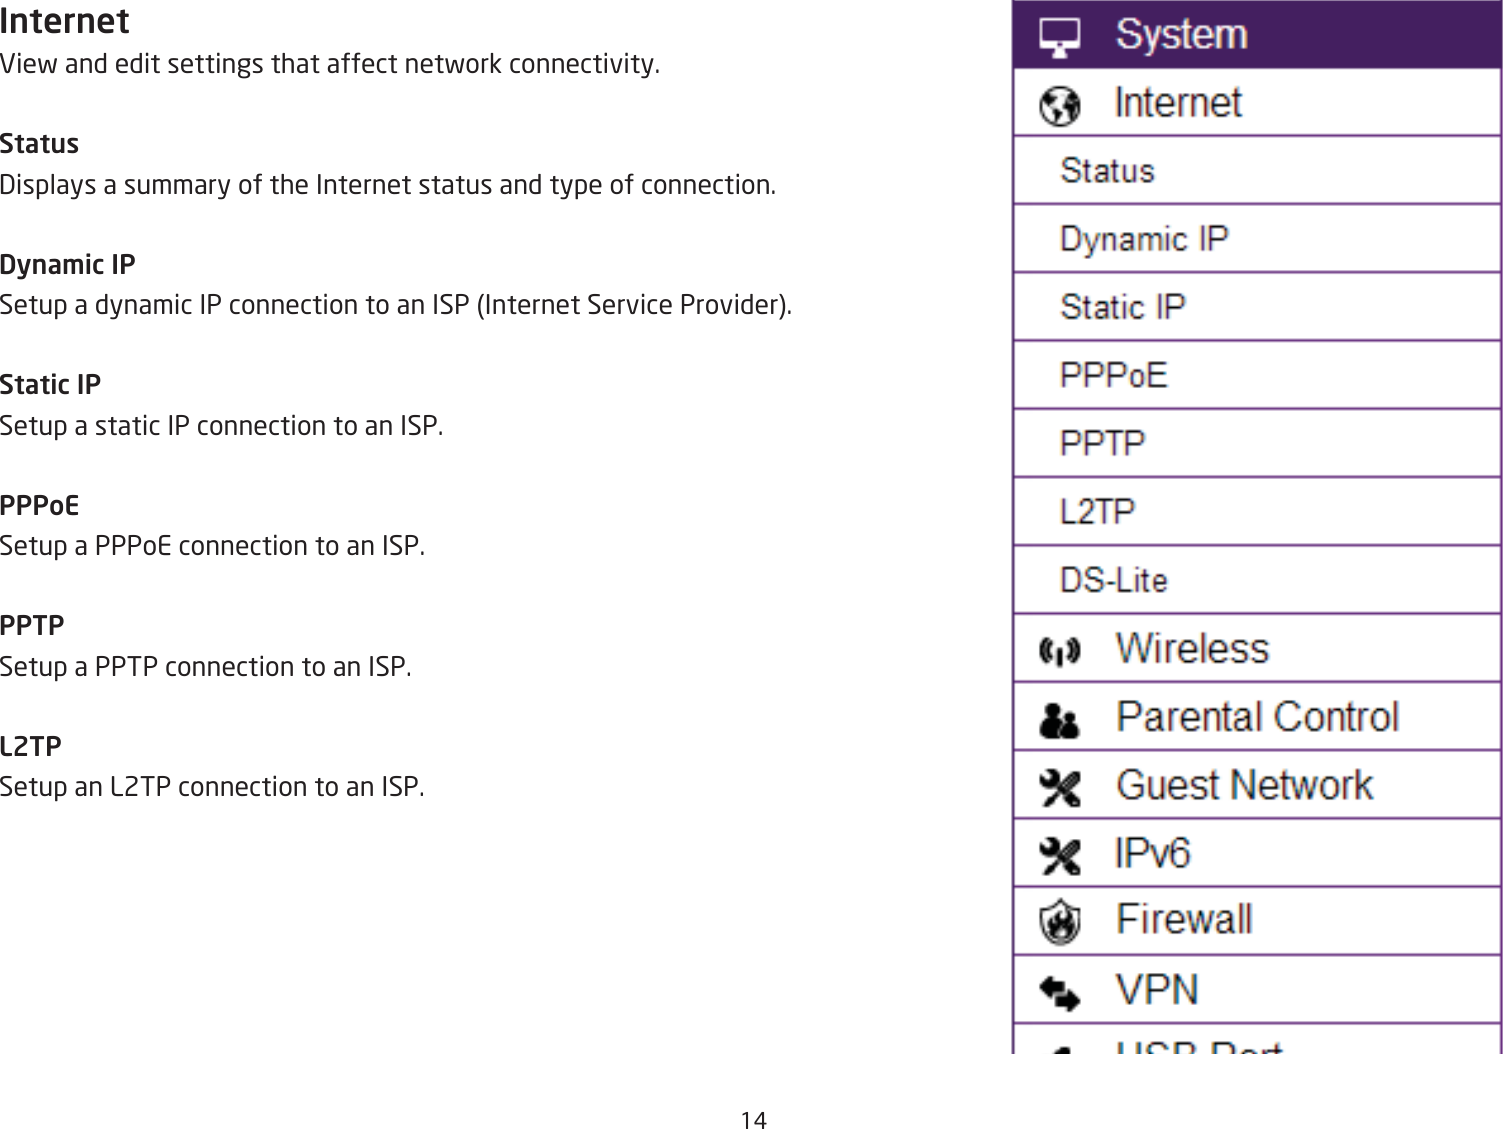 1#InternetEief and edit settings that affect netfork connectivity.Status3isplays a summary of the Internet status and type of connection.Dyna\ic IPSetup a dynamic IP connection to an ISP Internet Service Provider.Static IPSetup a static IP connection to an ISP.PPPoESetup a PPPoE connection to an ISP.PPTPSetup a PPTP connection to an ISP.L2TPSetup an L2TP connection to an ISP.